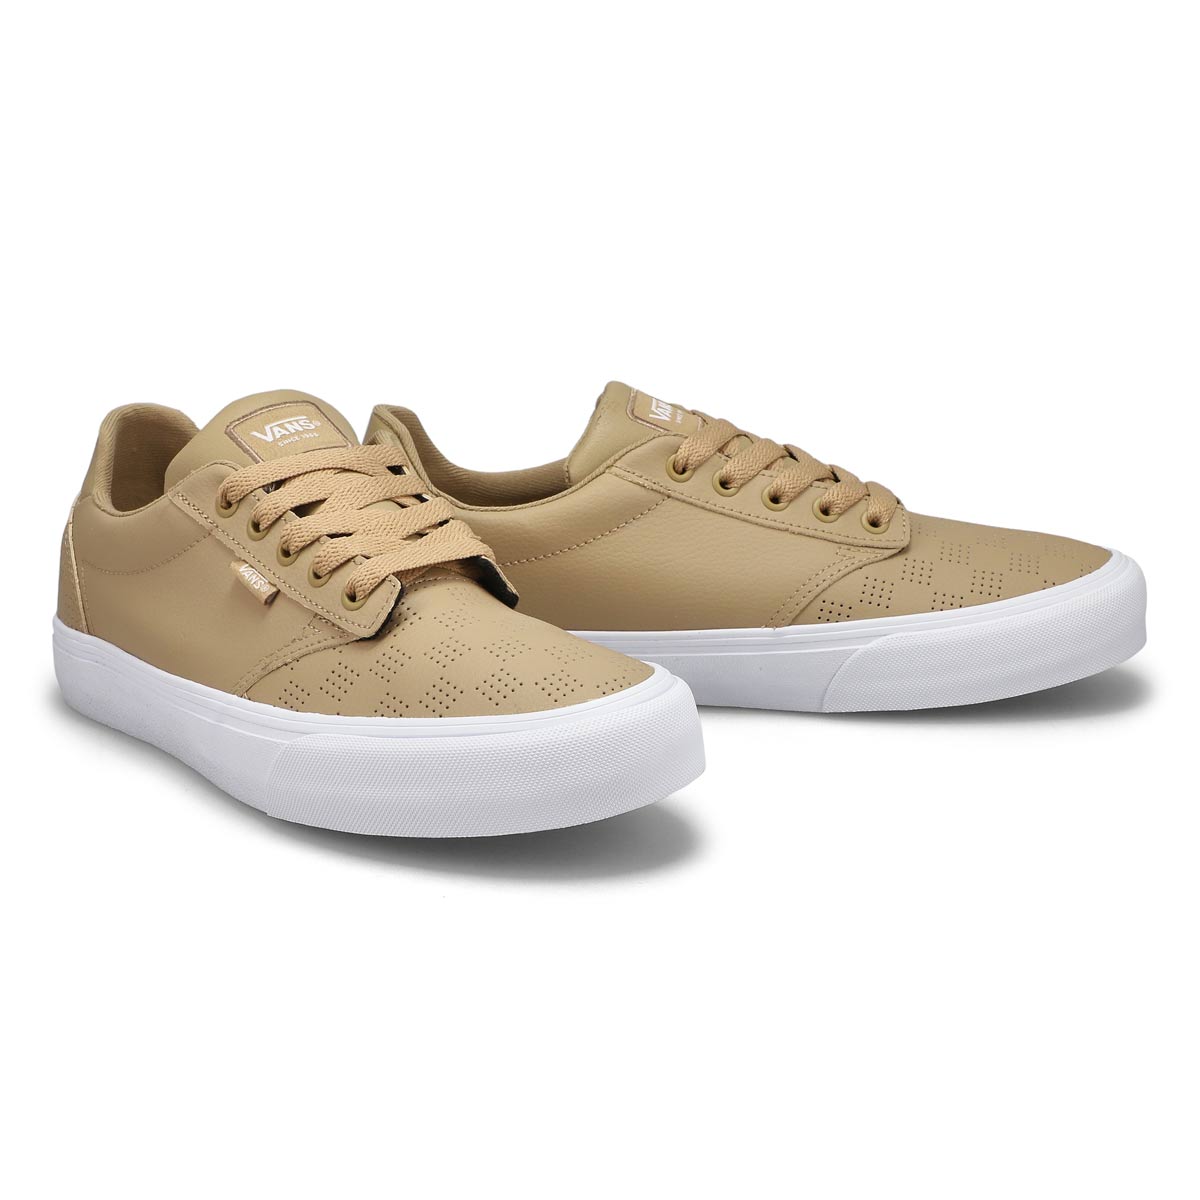 Men's Atwood Deluxe Sneaker - Incense/White